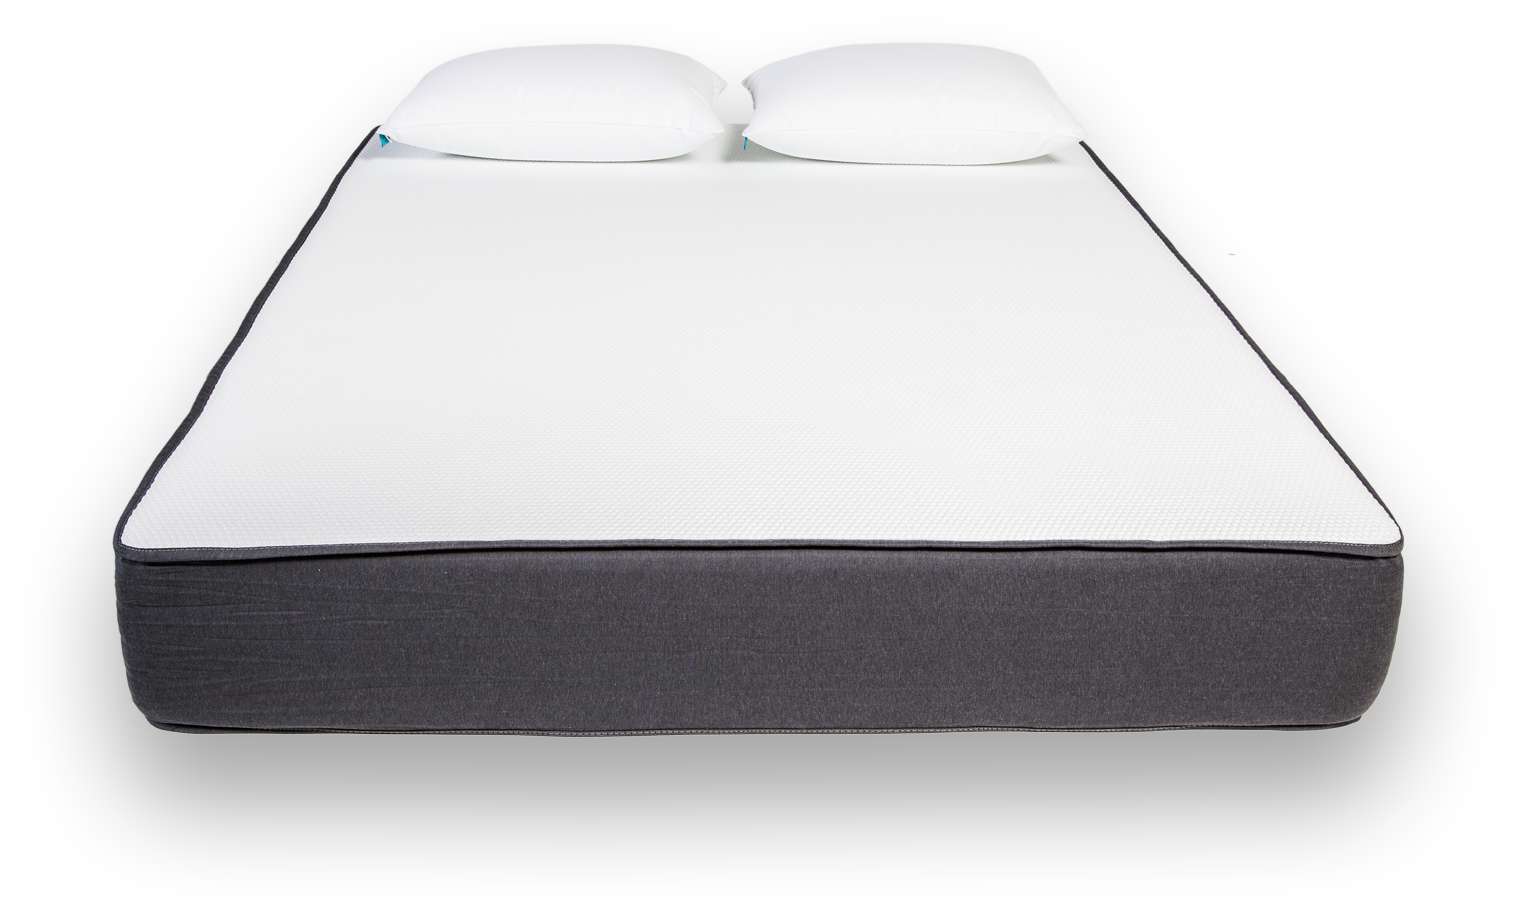 The HÜGGE Mattress and Pillow